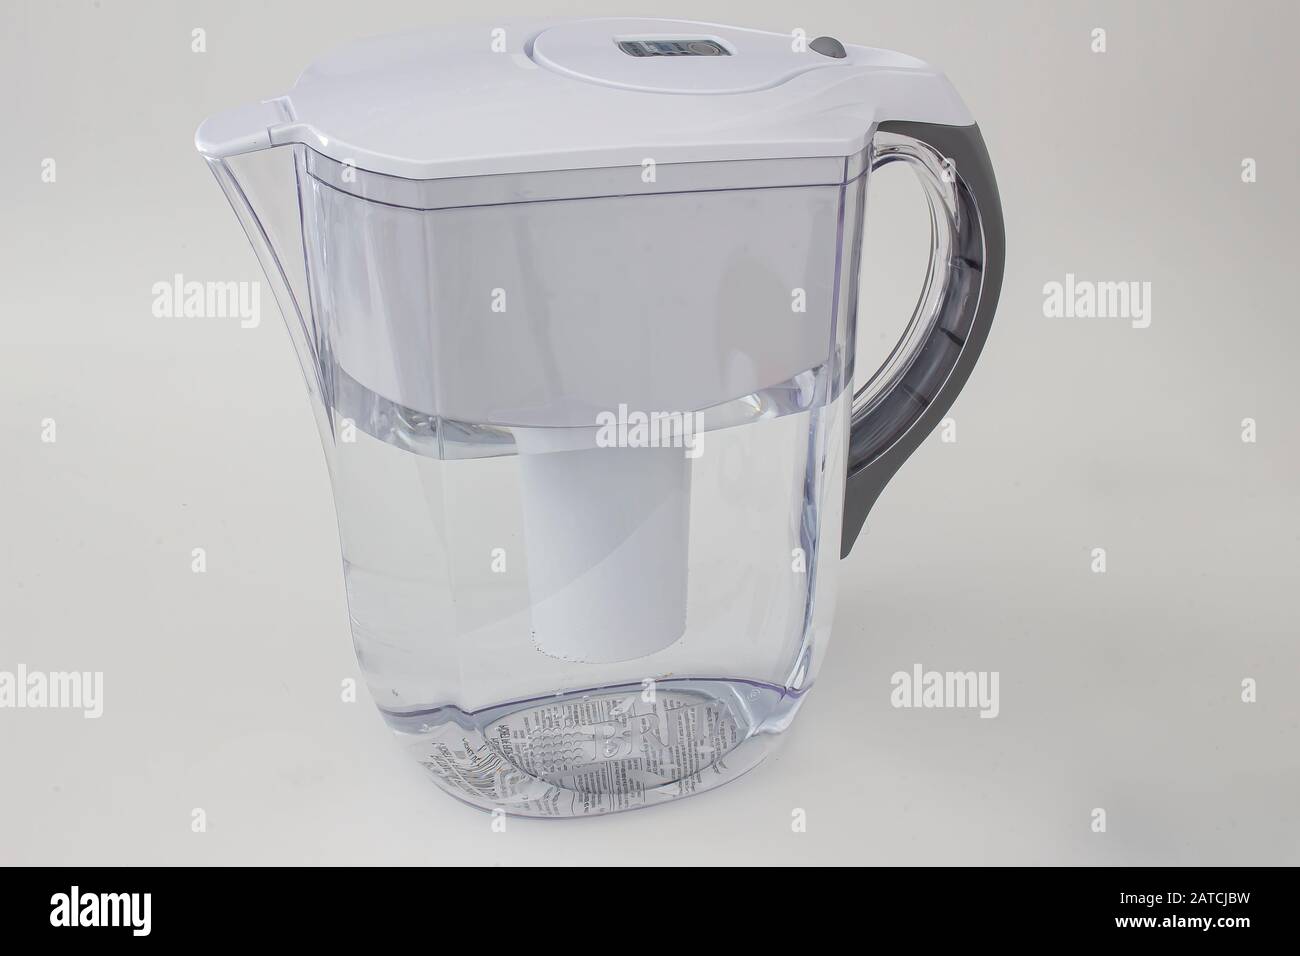 Brita Large 10 Cup Grand Water Pitcher with Filter - BPA Free